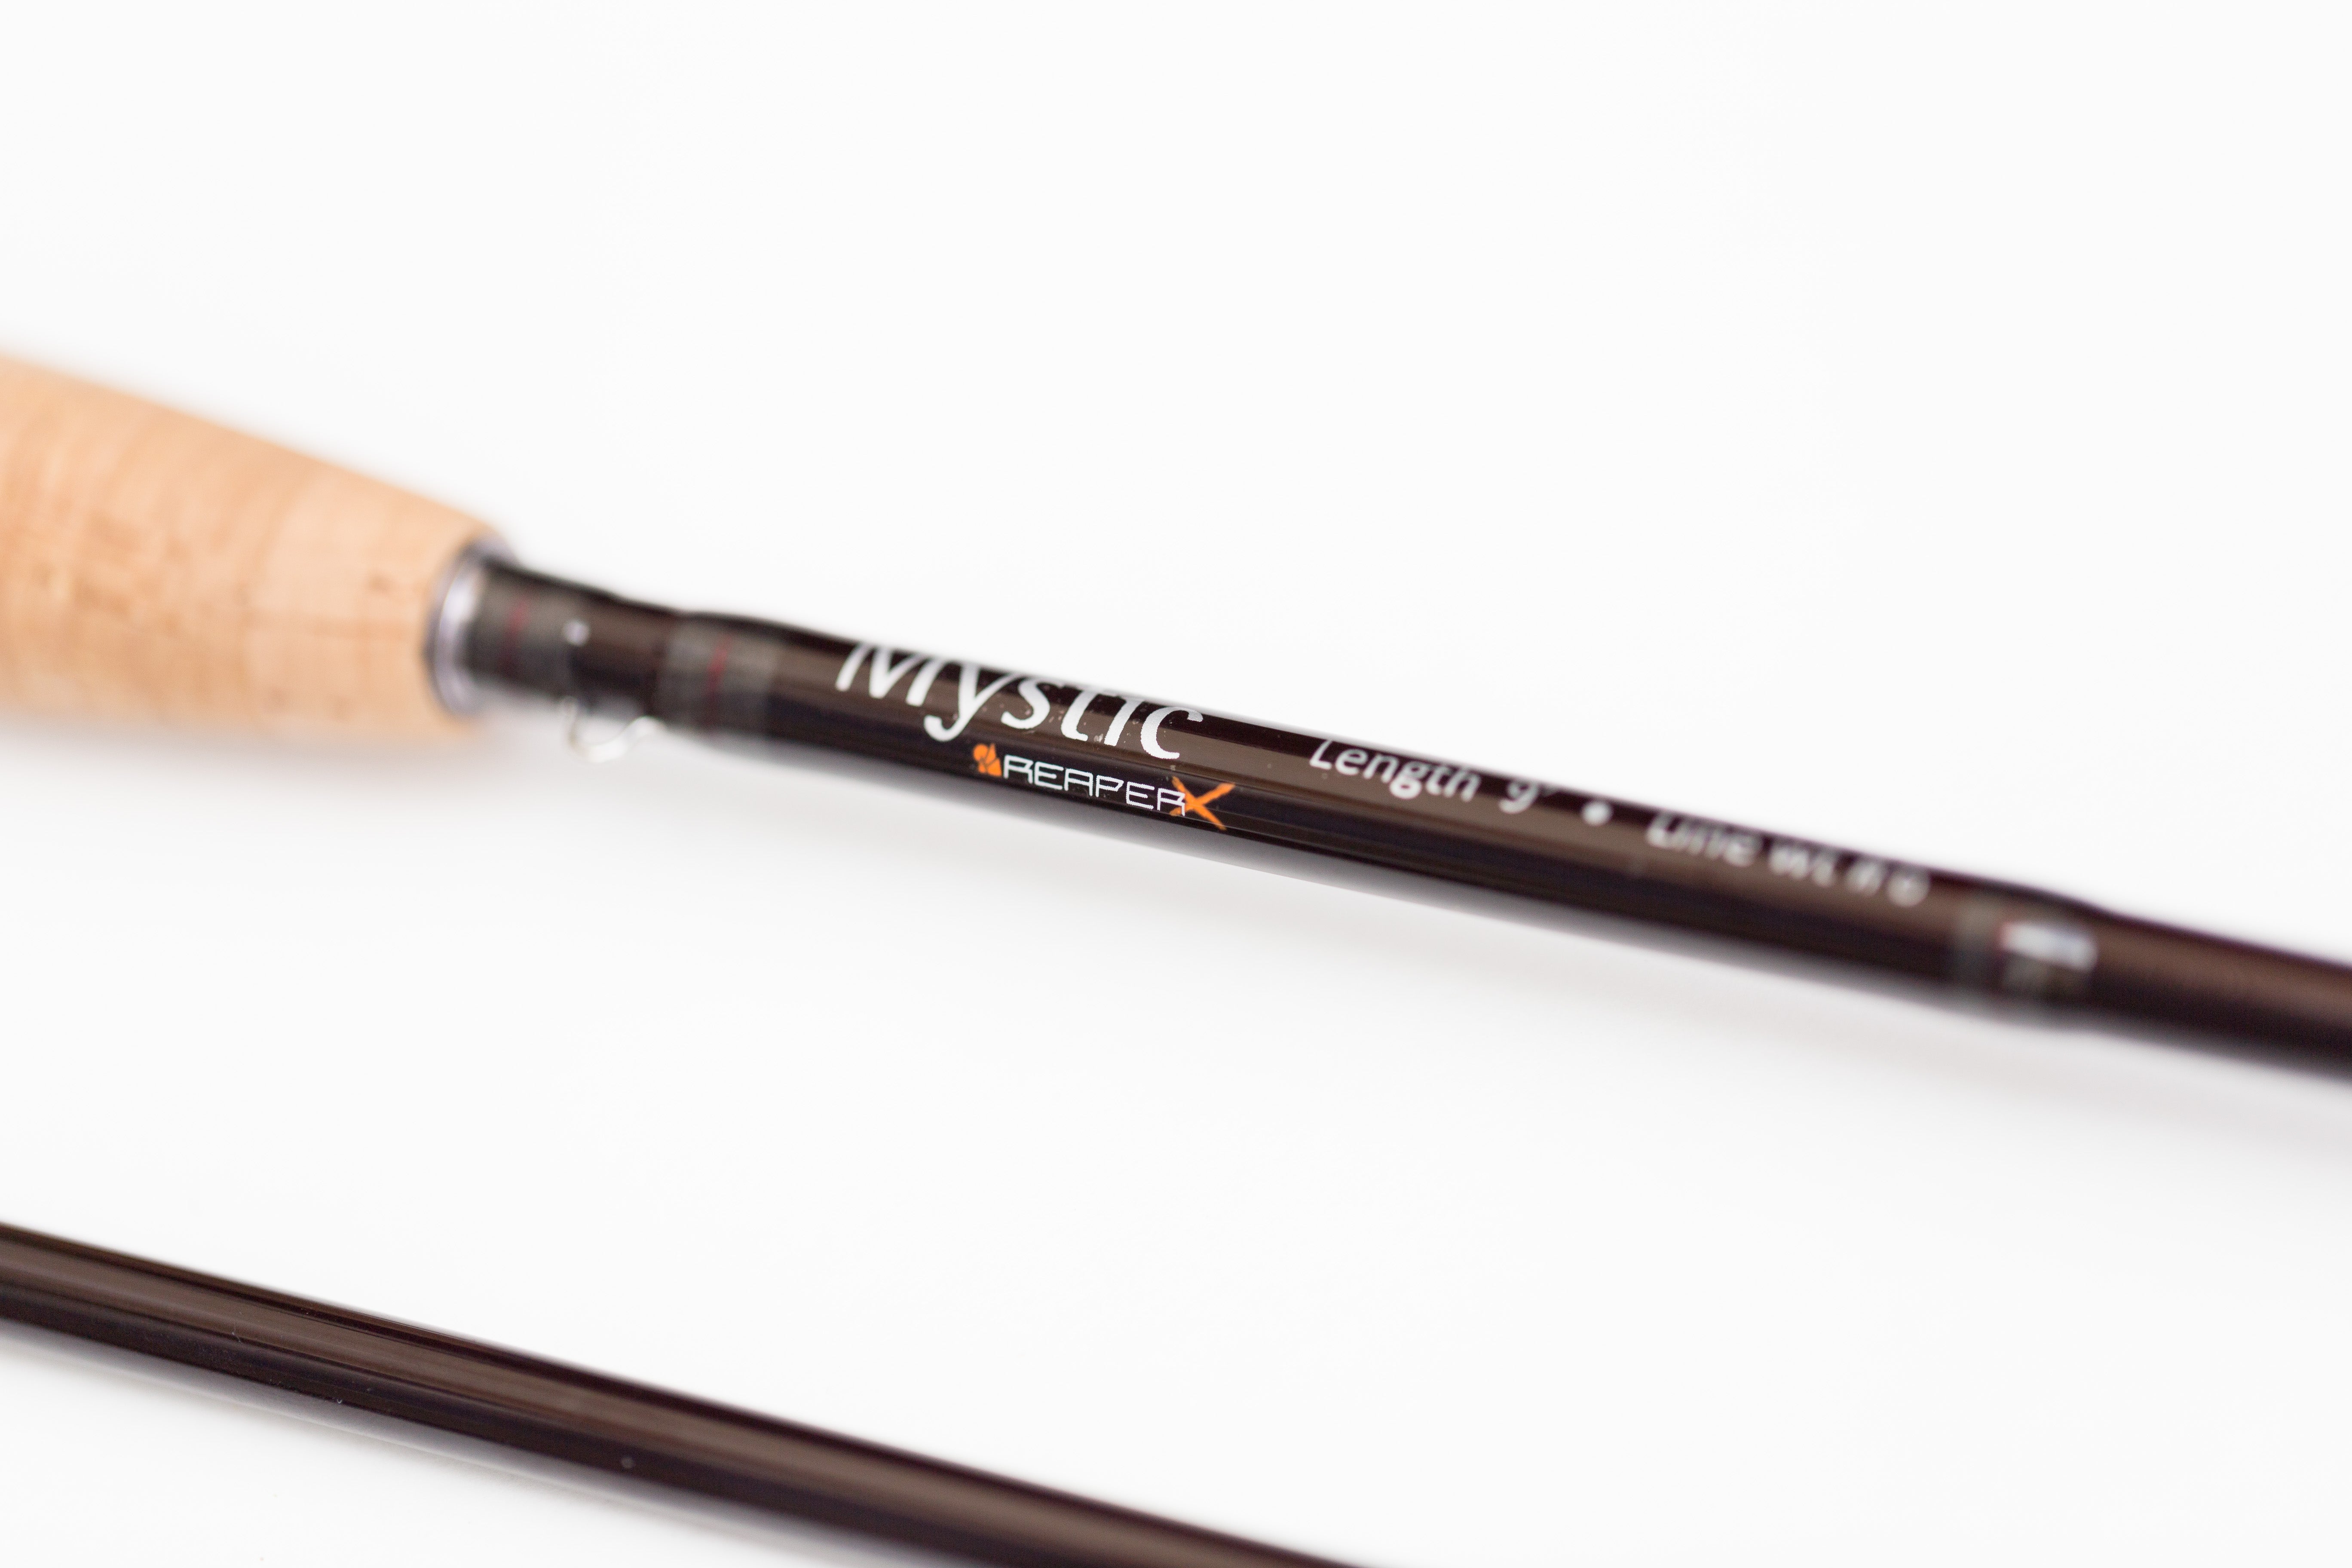 Mystic Rods Inception Combo Fly Rod - Fly Fishing